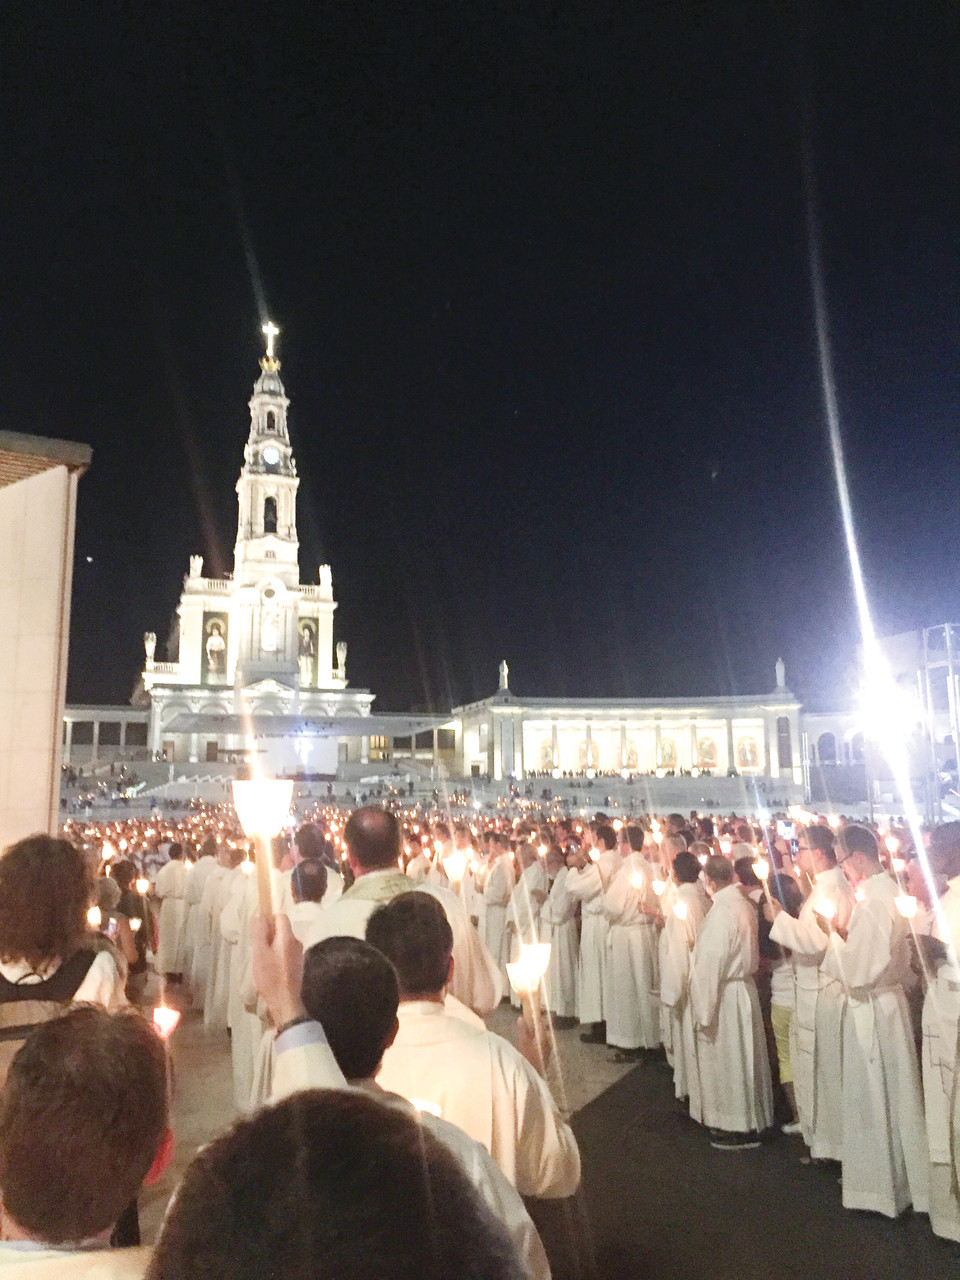 Thousands witness a candlelight vigil at the shrine of Fatima in central Portugal.